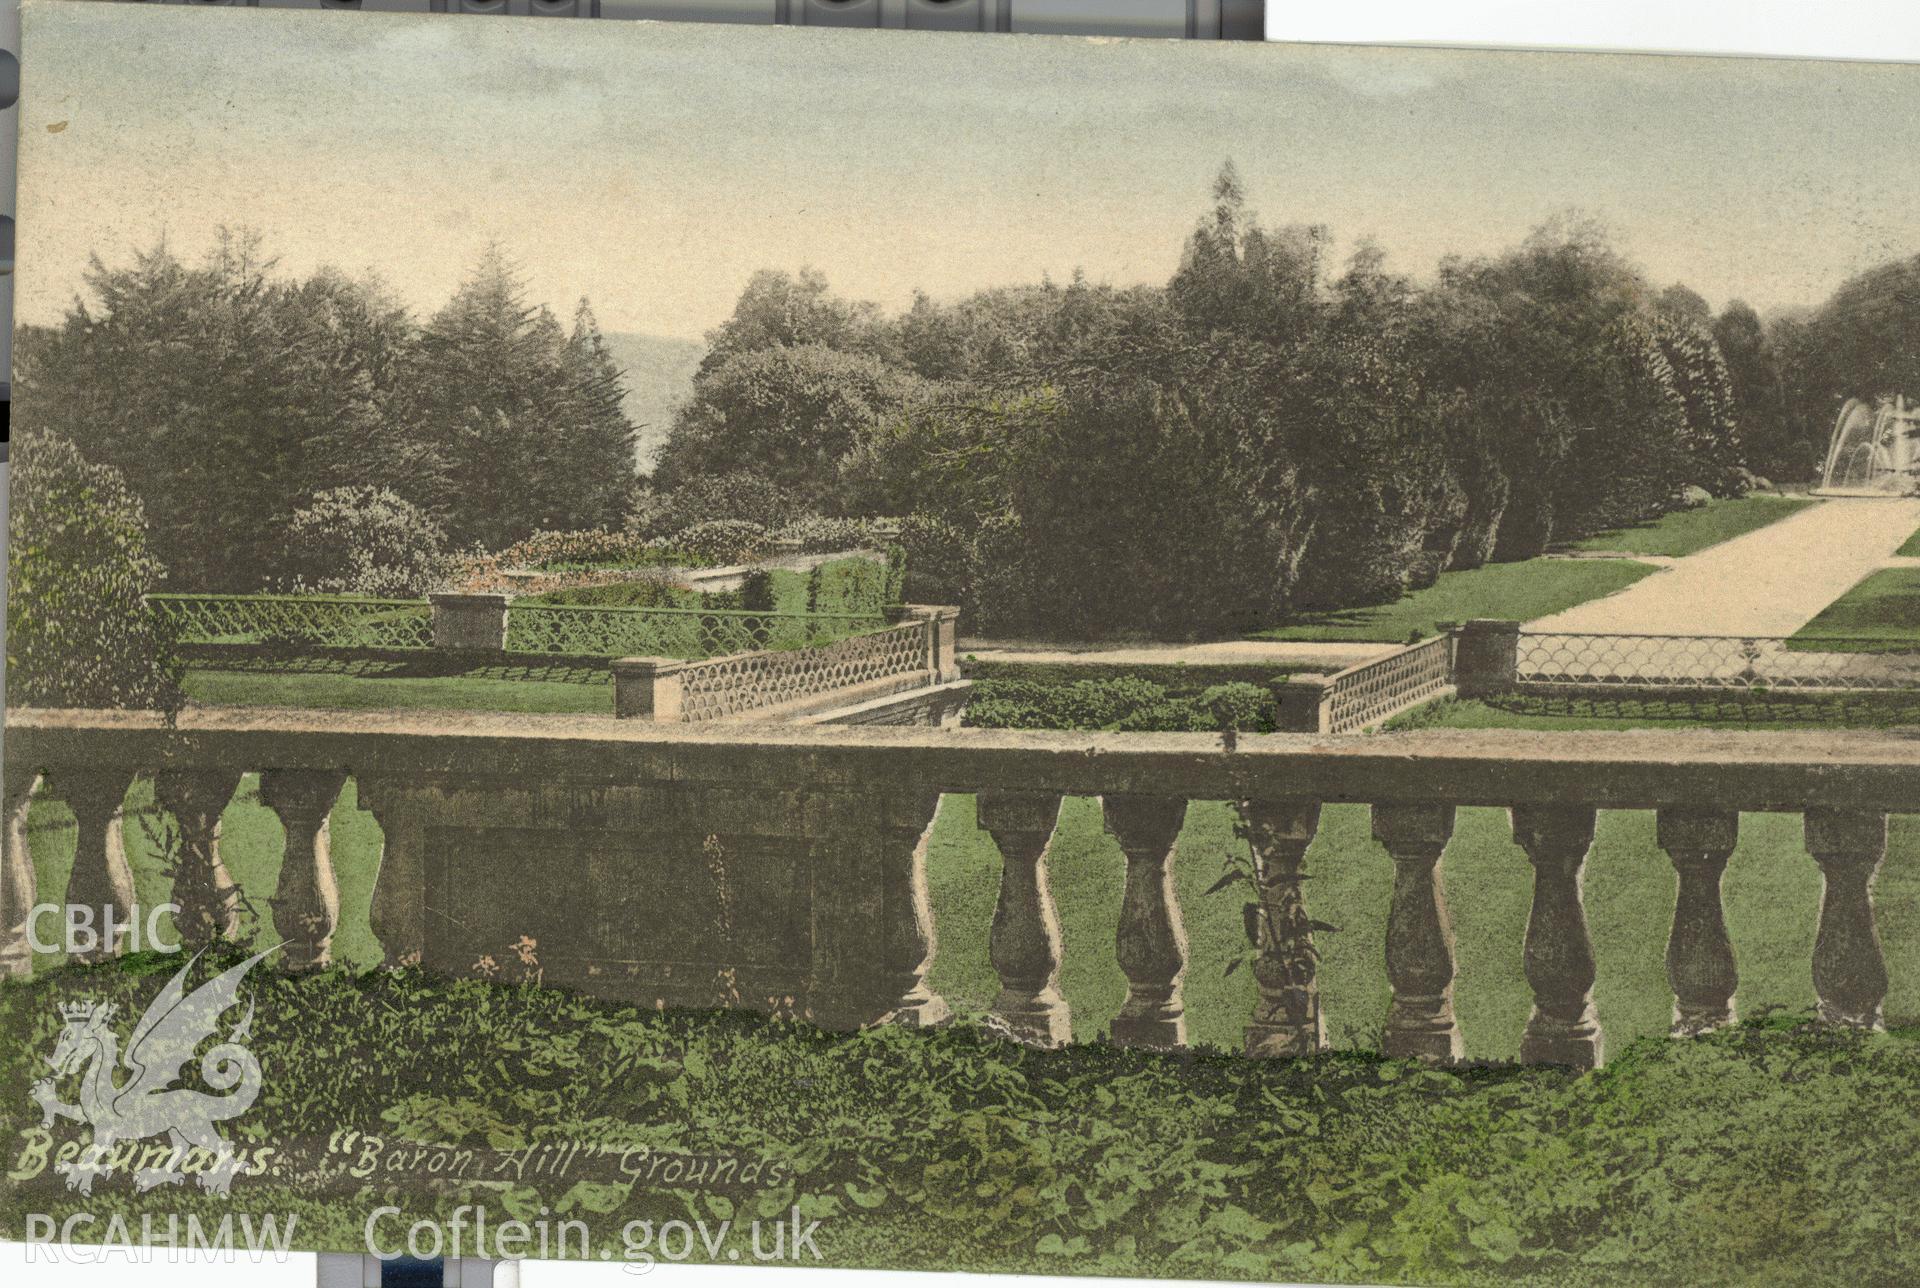 Digitised postcard image of Baron Hill Gardens, Beaumaris, F. Frith and Co. Ltd,. Produced by Parks and Gardens Data Services, from an original item in the Peter Davis Collection at Parks and Gardens UK. We hold only web-resolution images of this collection, suitable for viewing on screen and for research purposes only. We do not hold the original images, or publication quality scans.